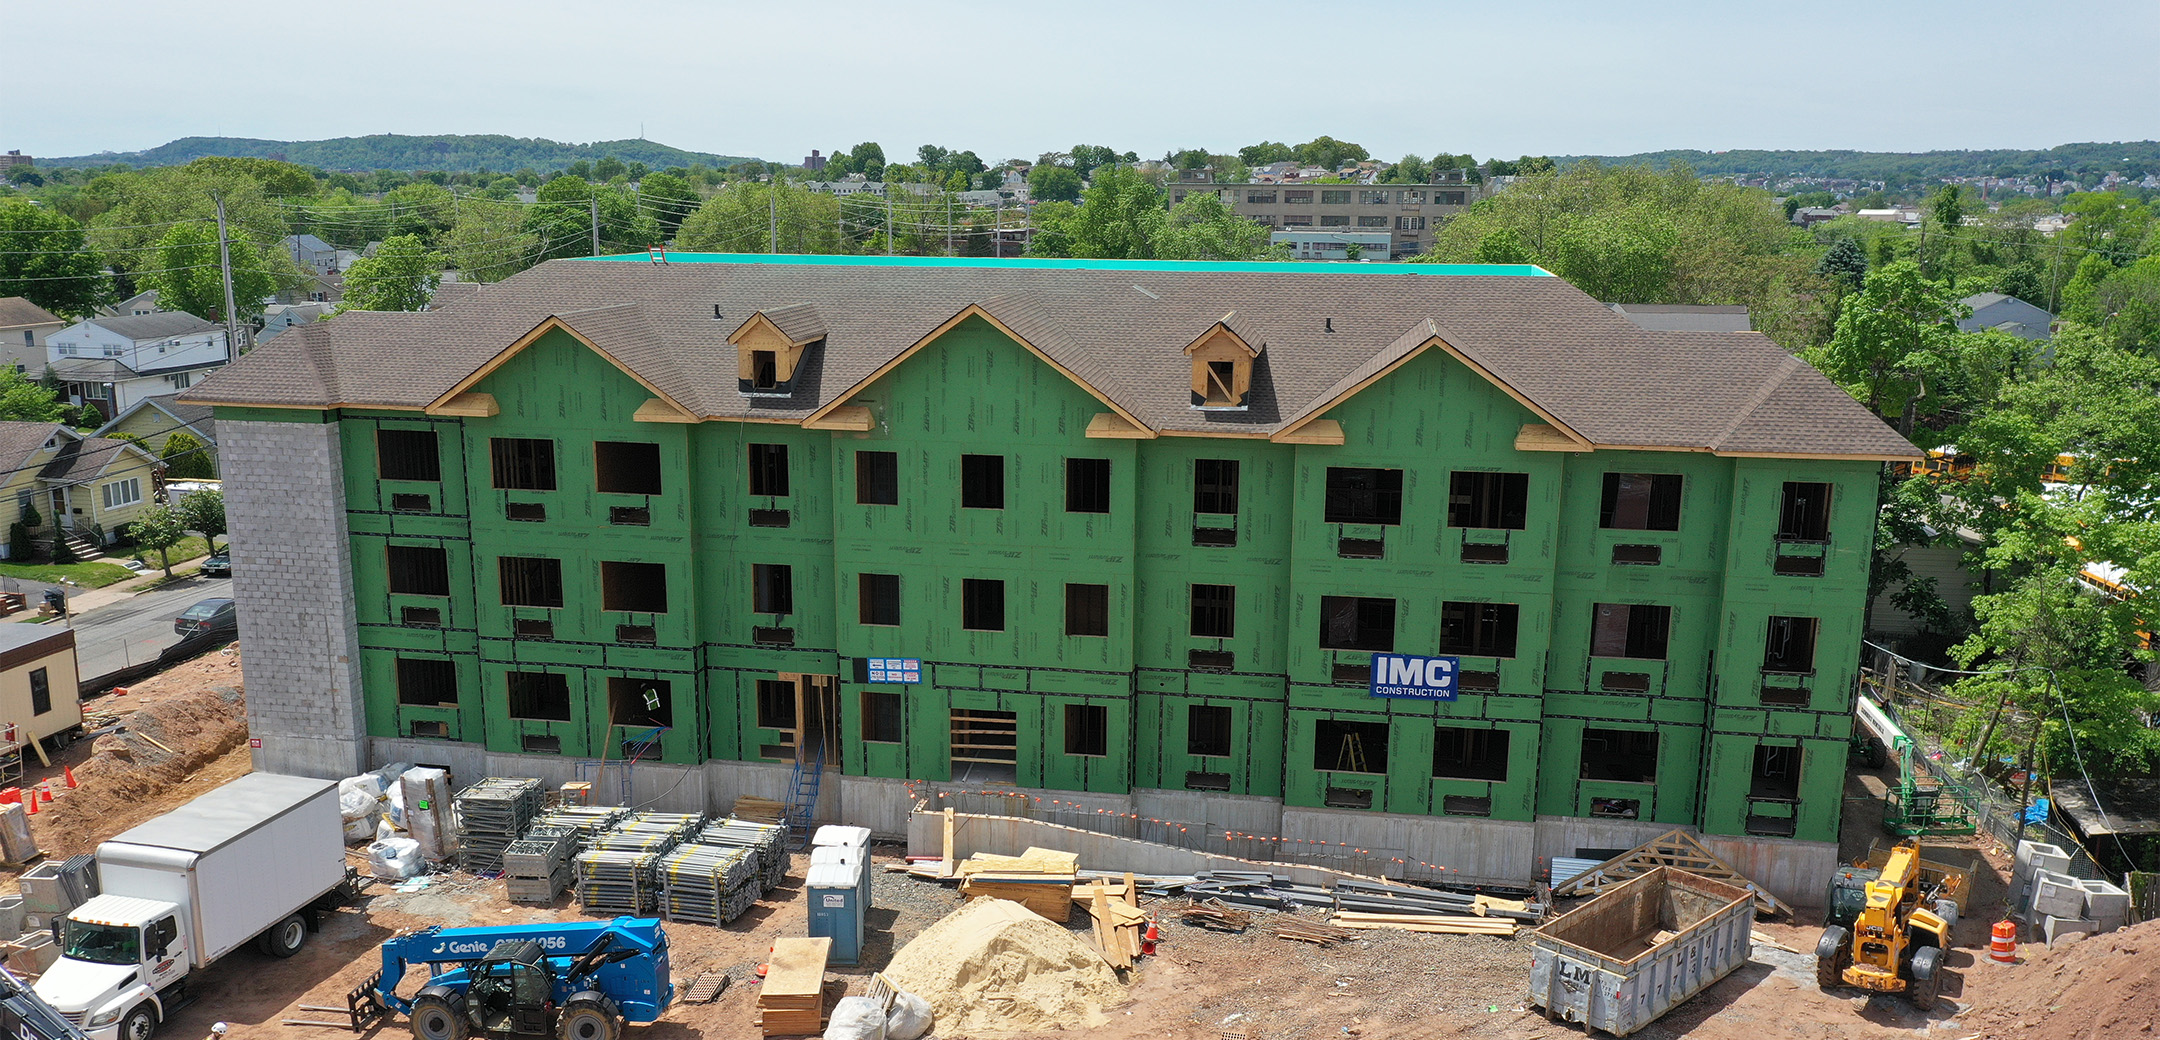 A front view of Chelsea Senior Living facility under construction with green exterior walls.